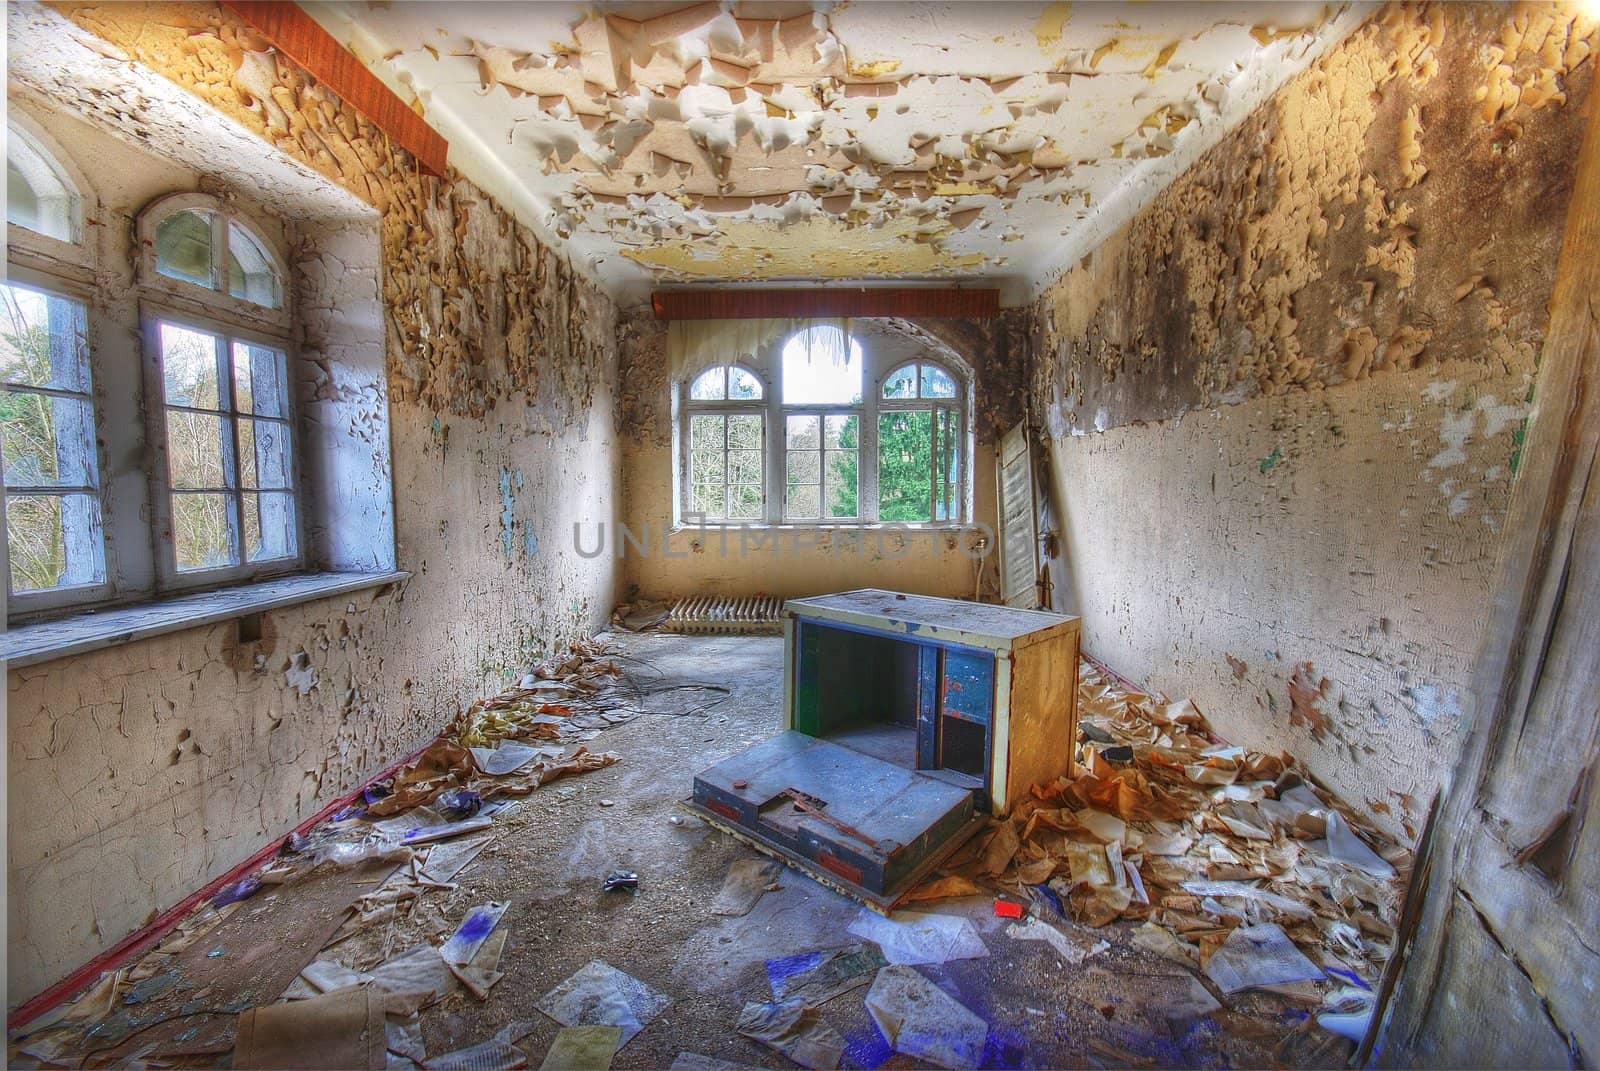 looking inside an abandoned room in a ruin